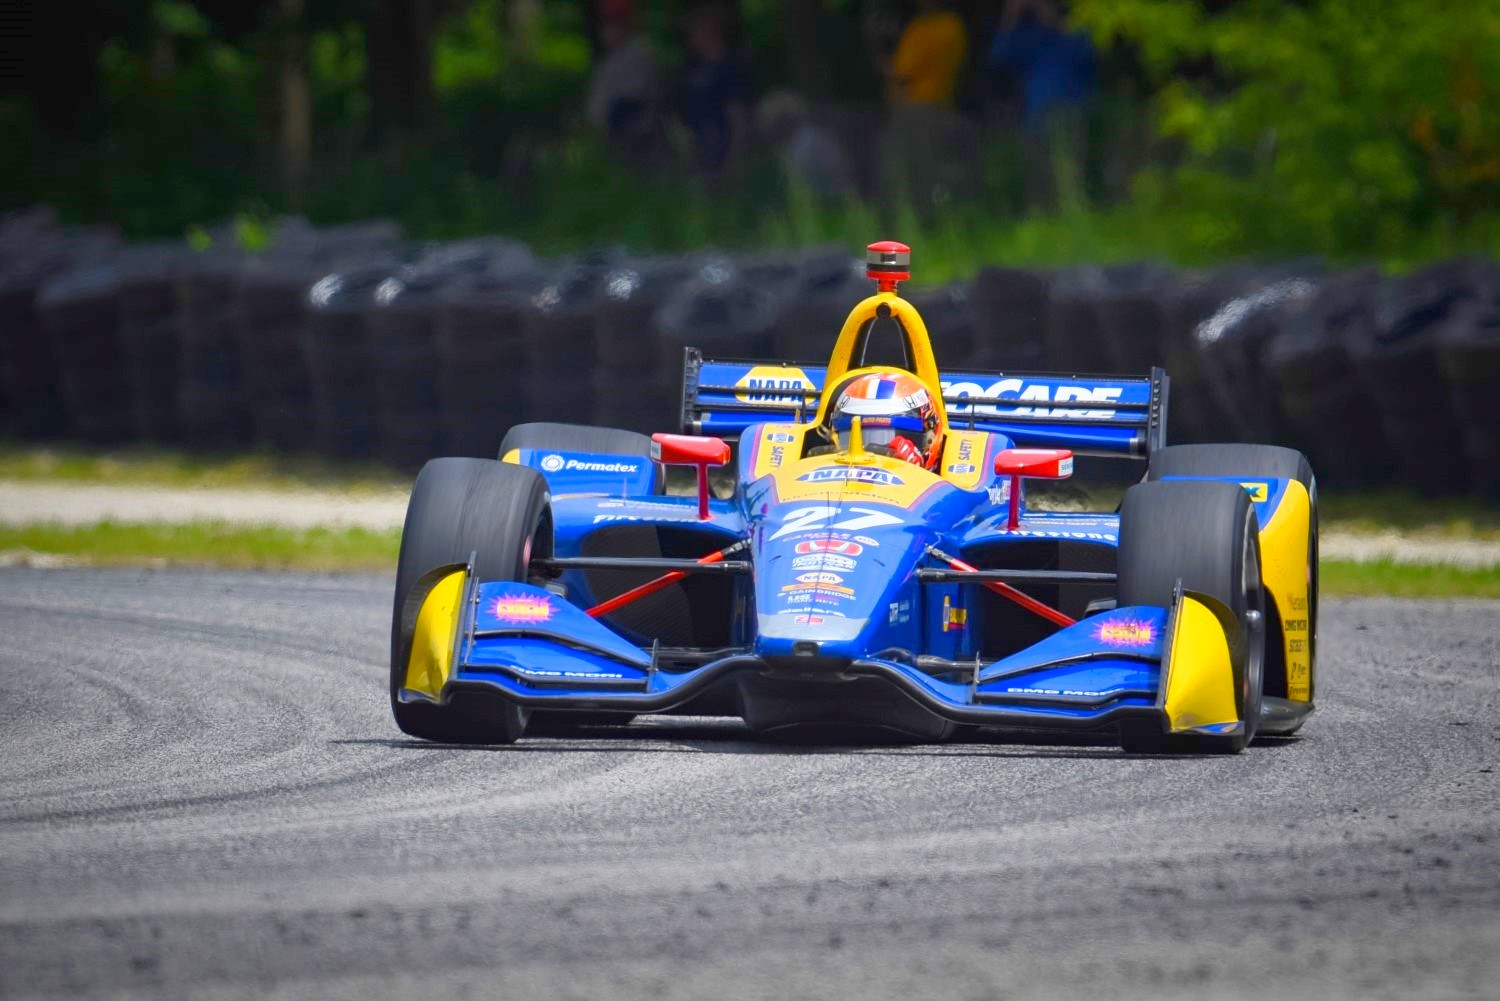 Alexander Rossi, who completely dominated last year's Road America race, will be happy to hear he might get double the pleasure this year.